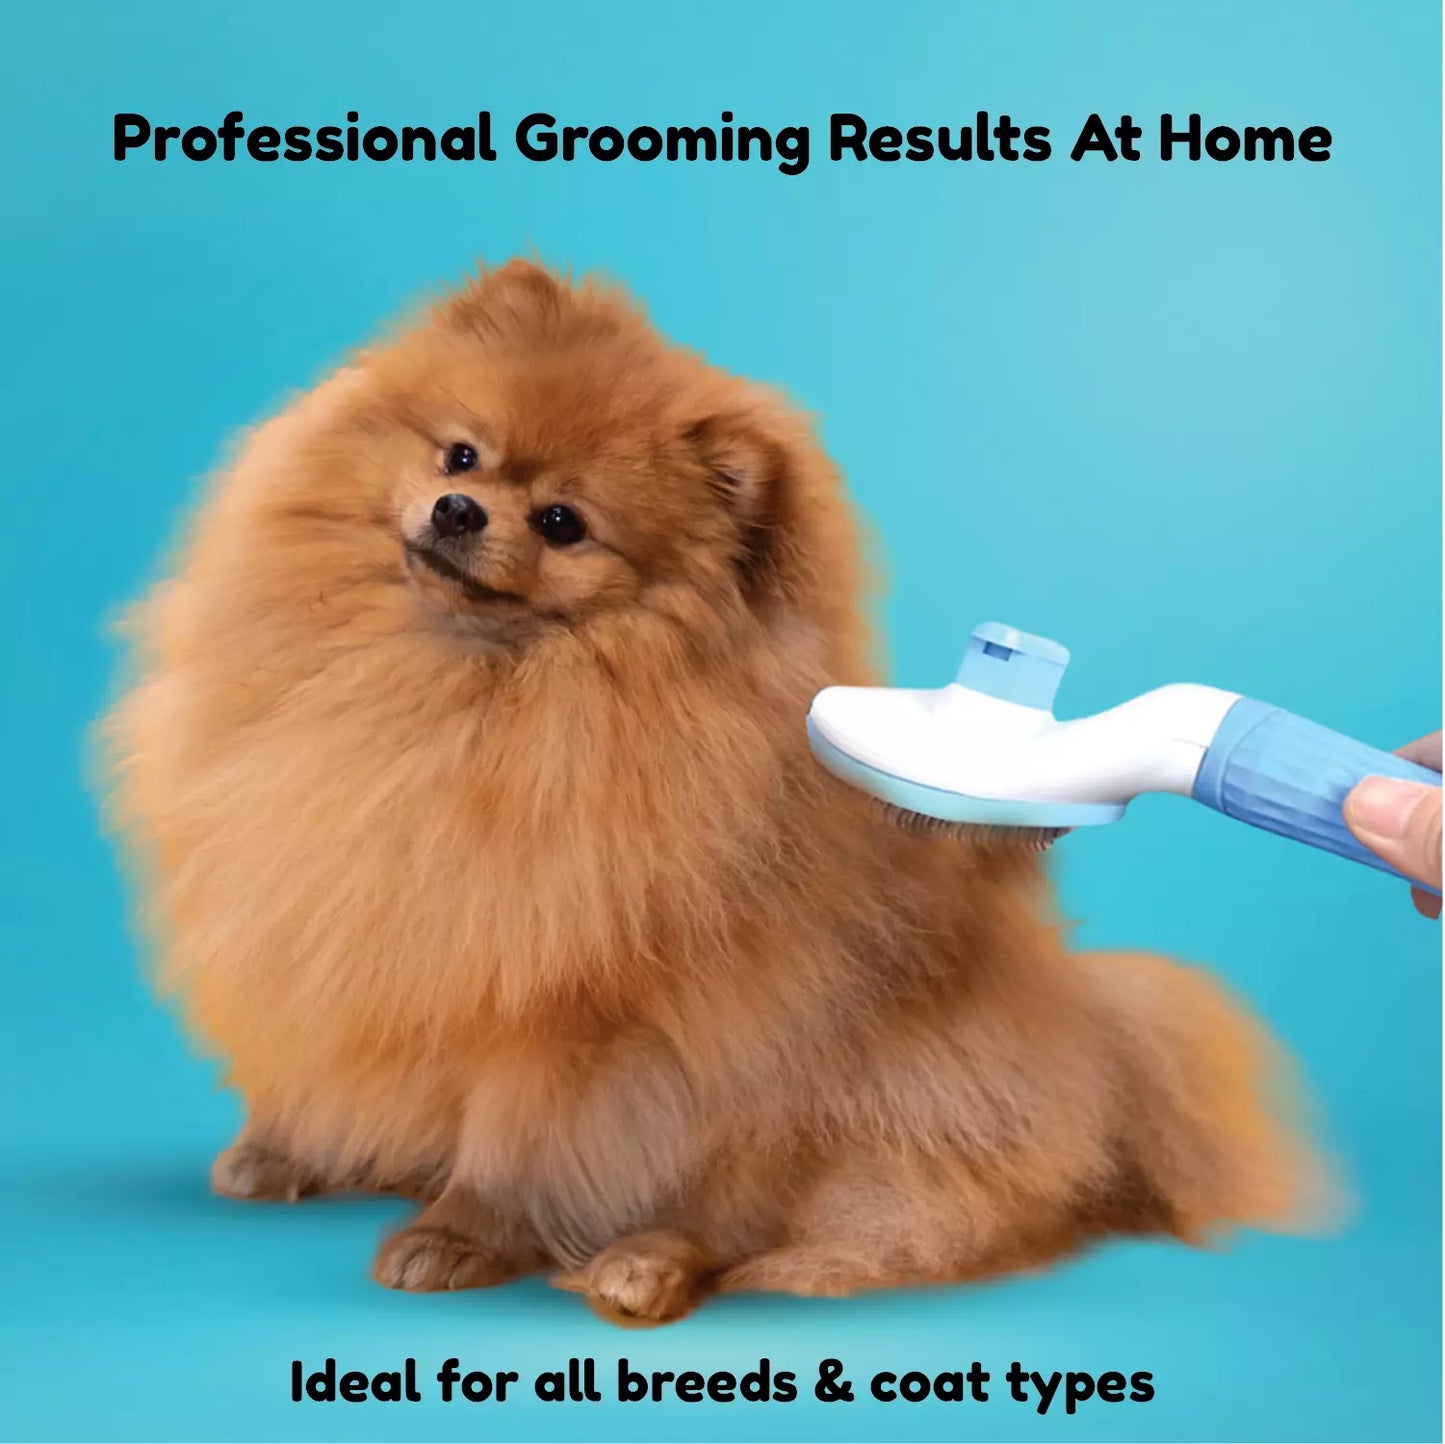 Self Cleaning Slicker Brush for Dogs & Cats - Oval